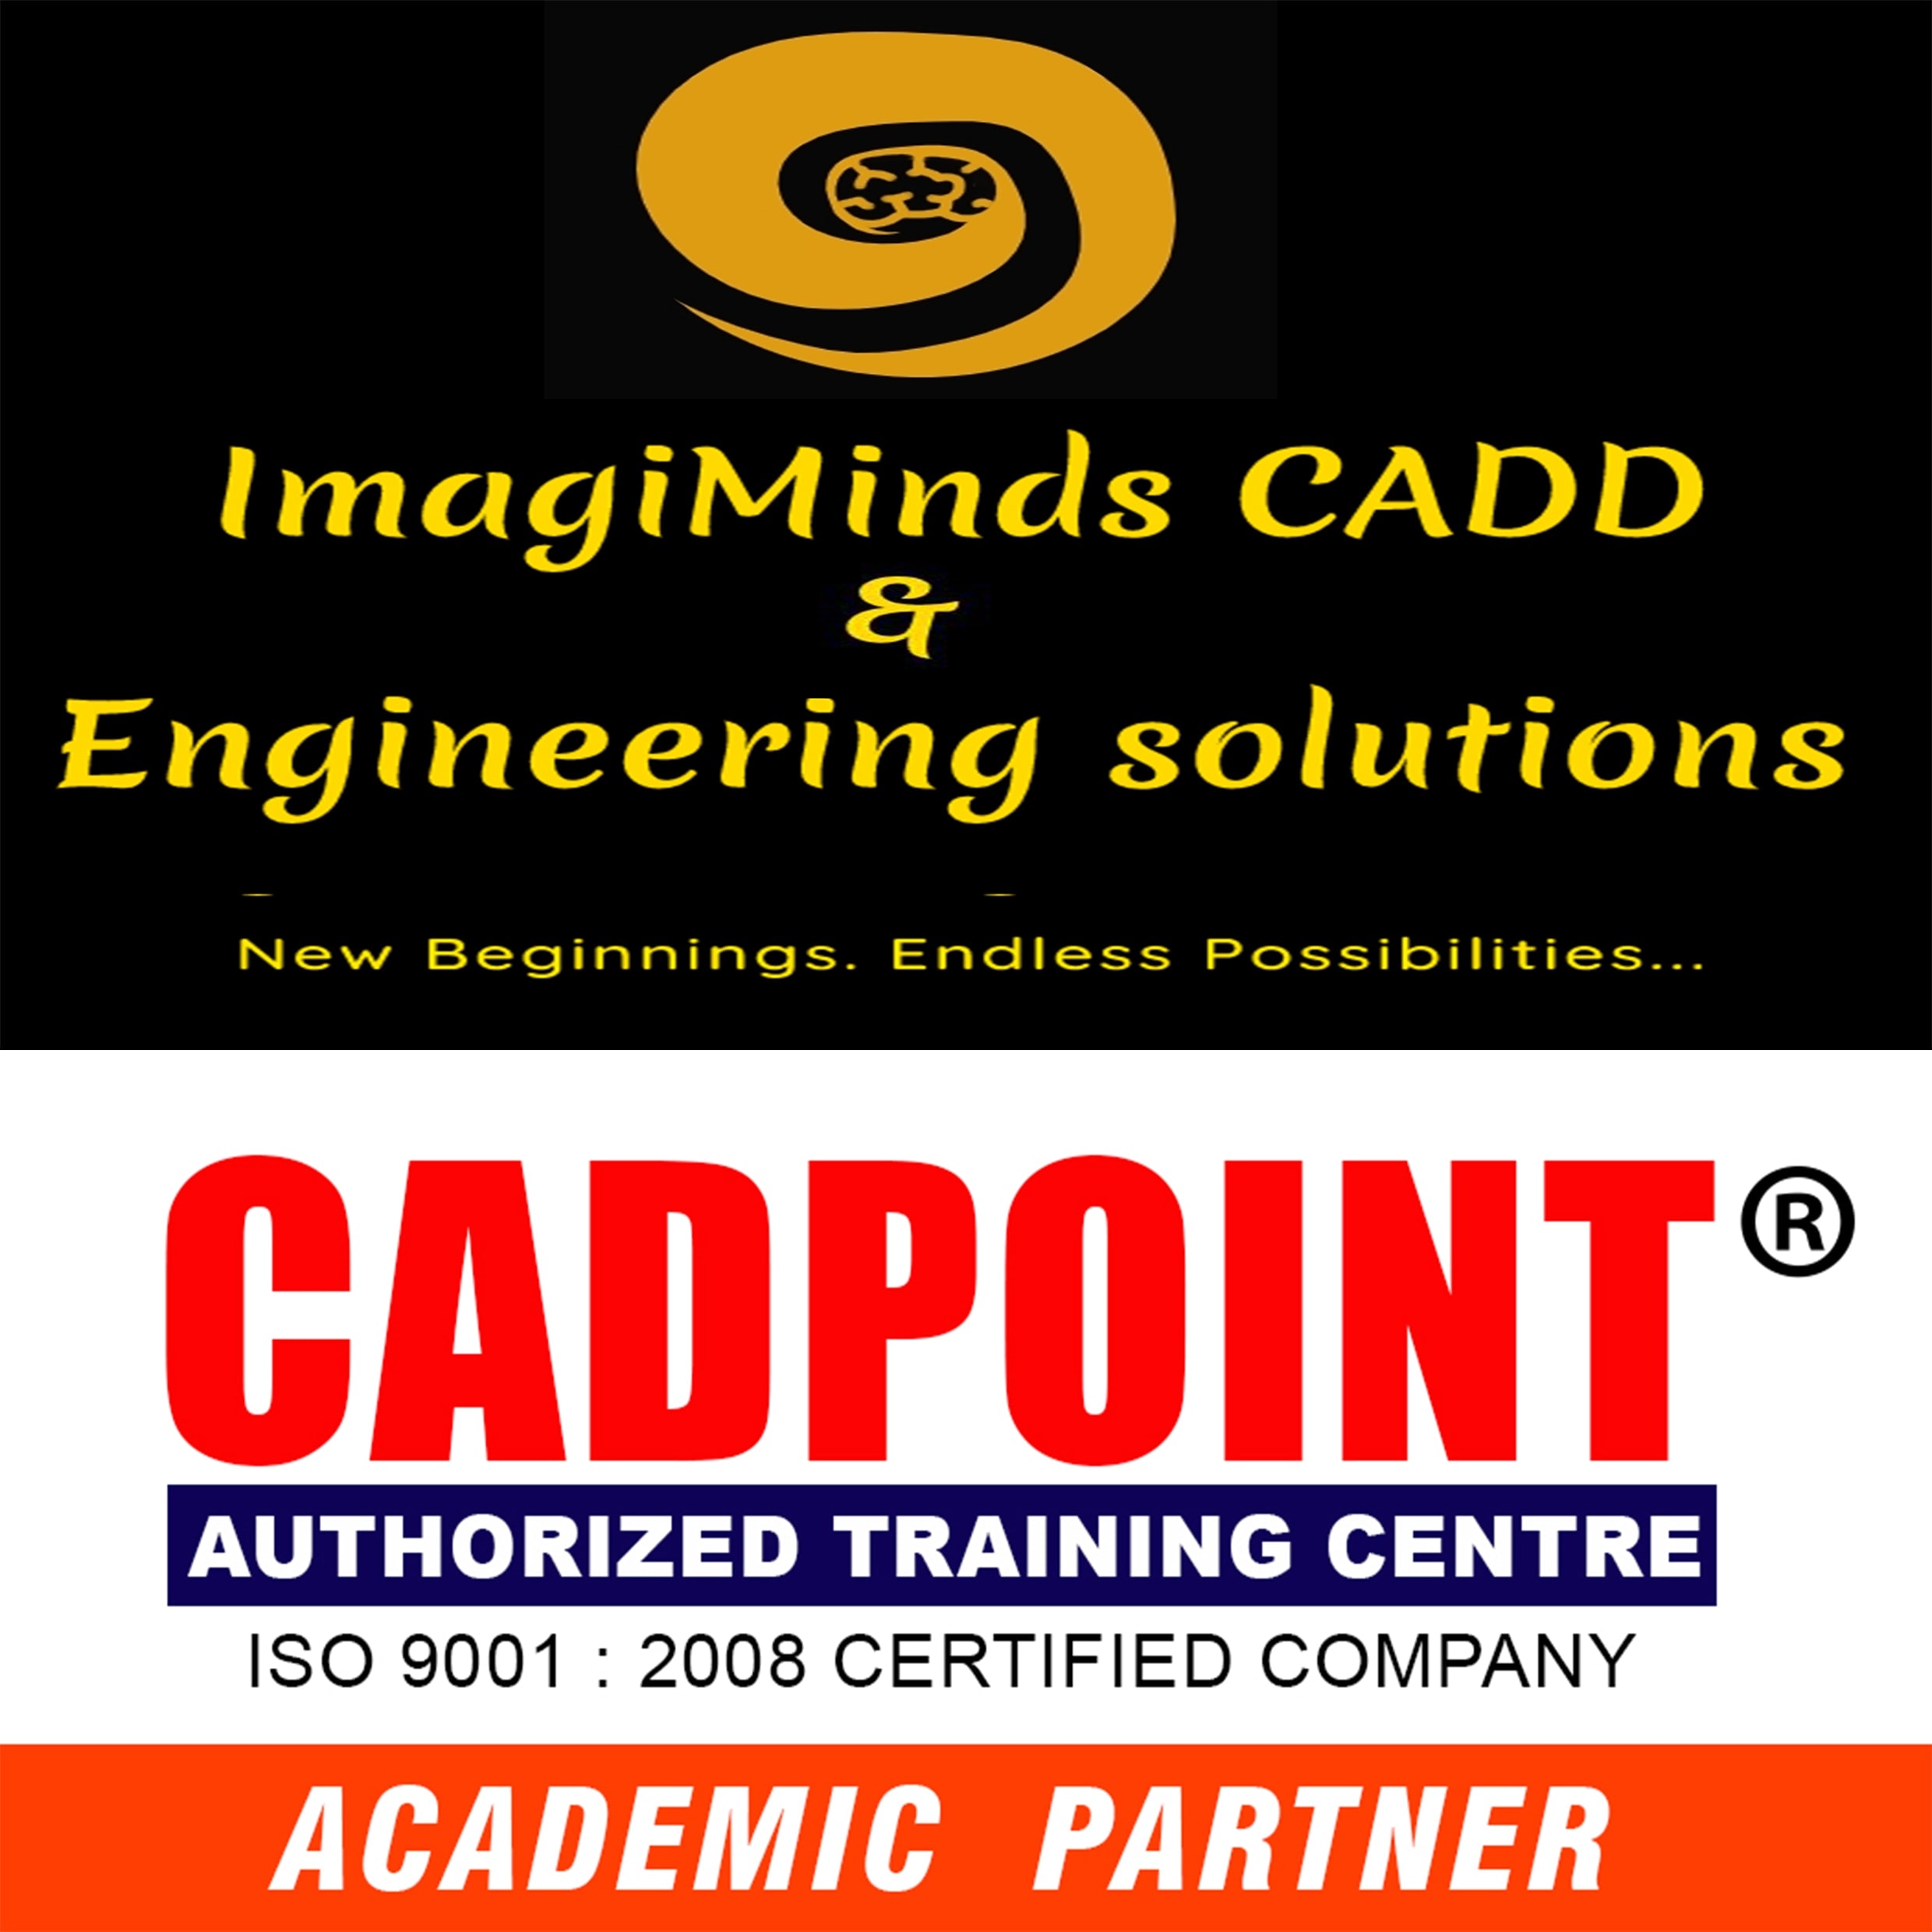 Imagimindscadd & Engineering Solutions CADPOINT